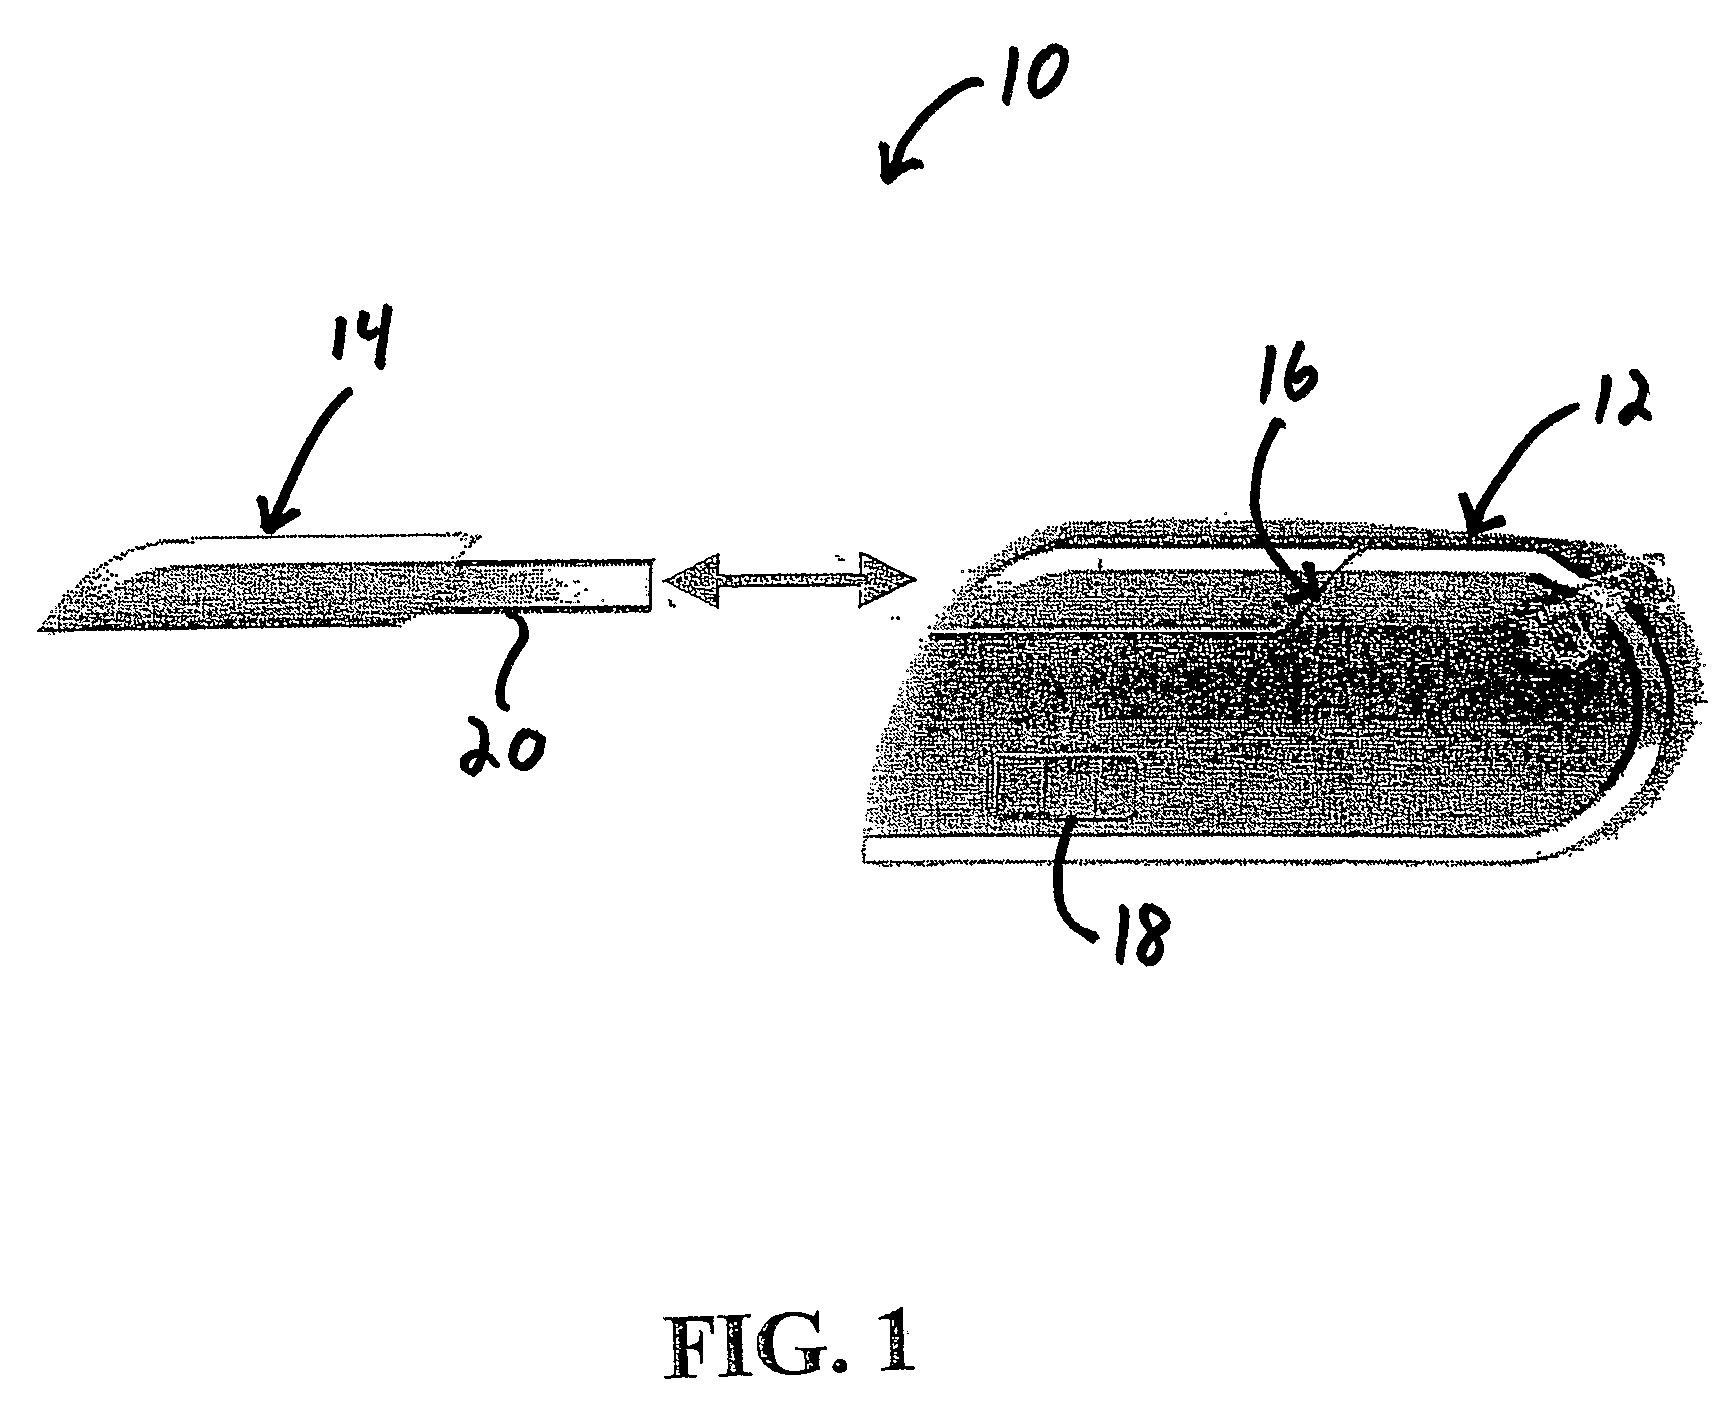 Inertial Sensor-Based Pointing Device With Removable Transceiver